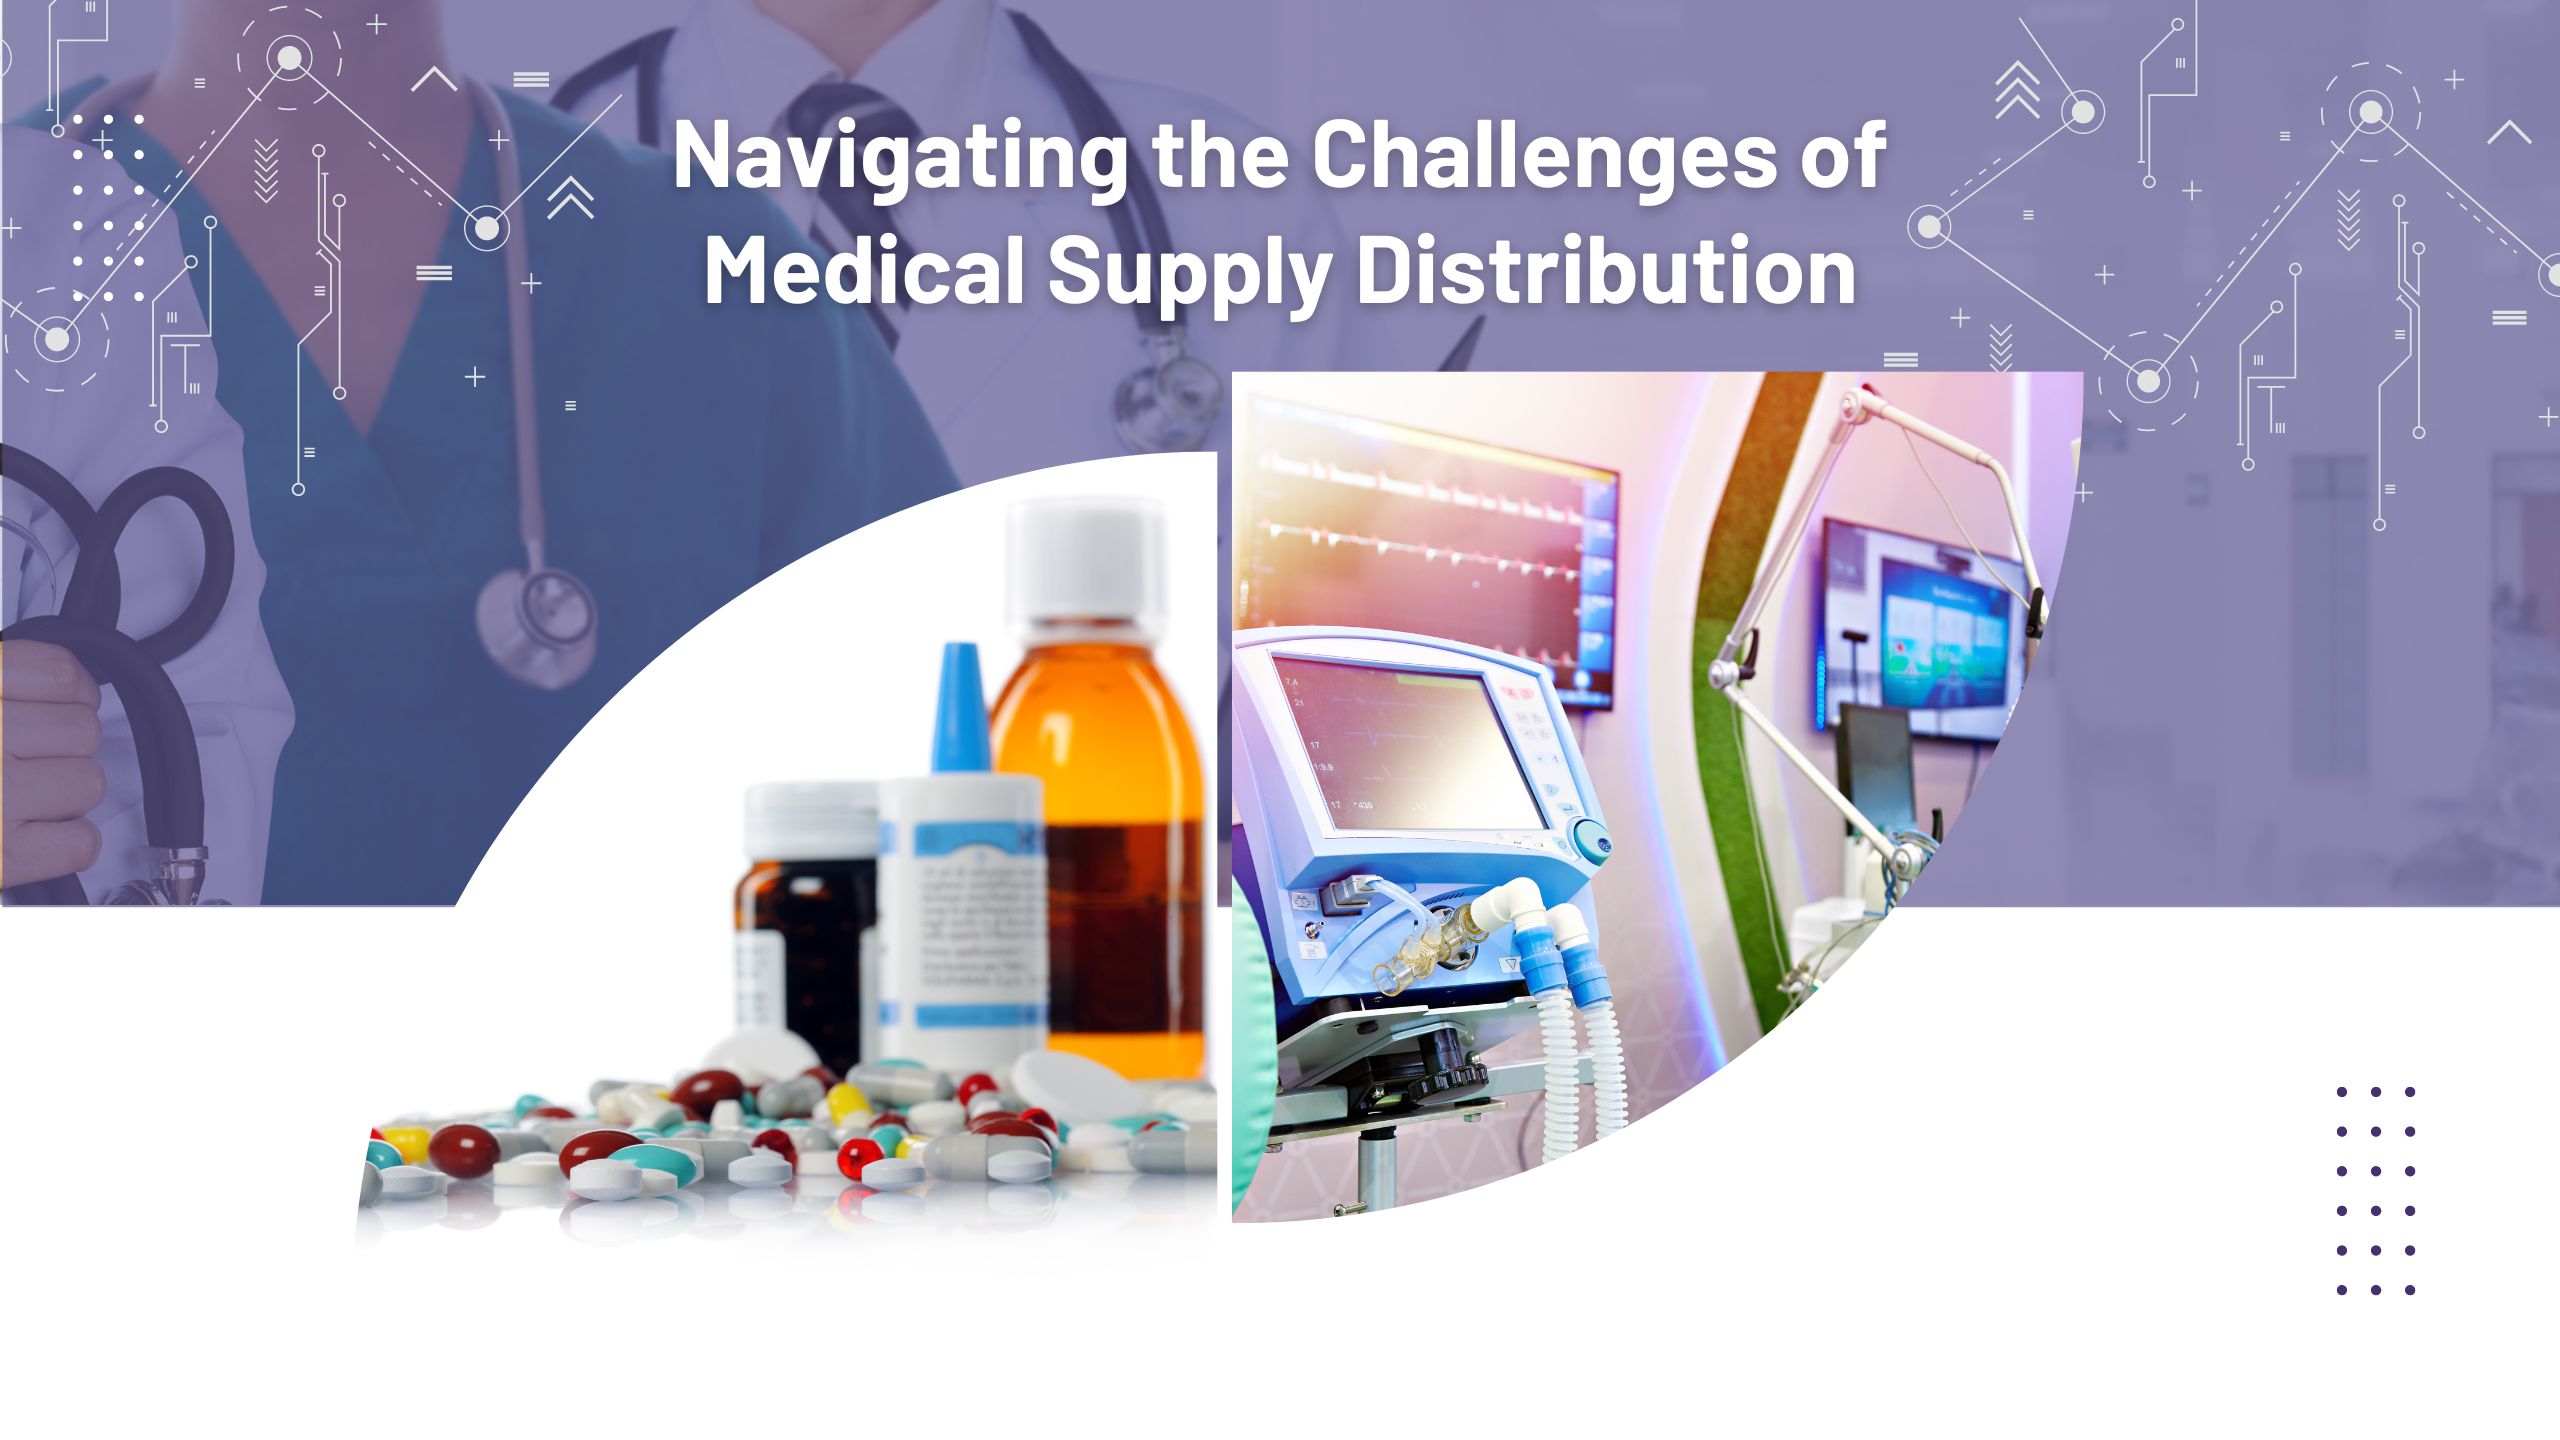 Challenges of Medical Supply Distribution